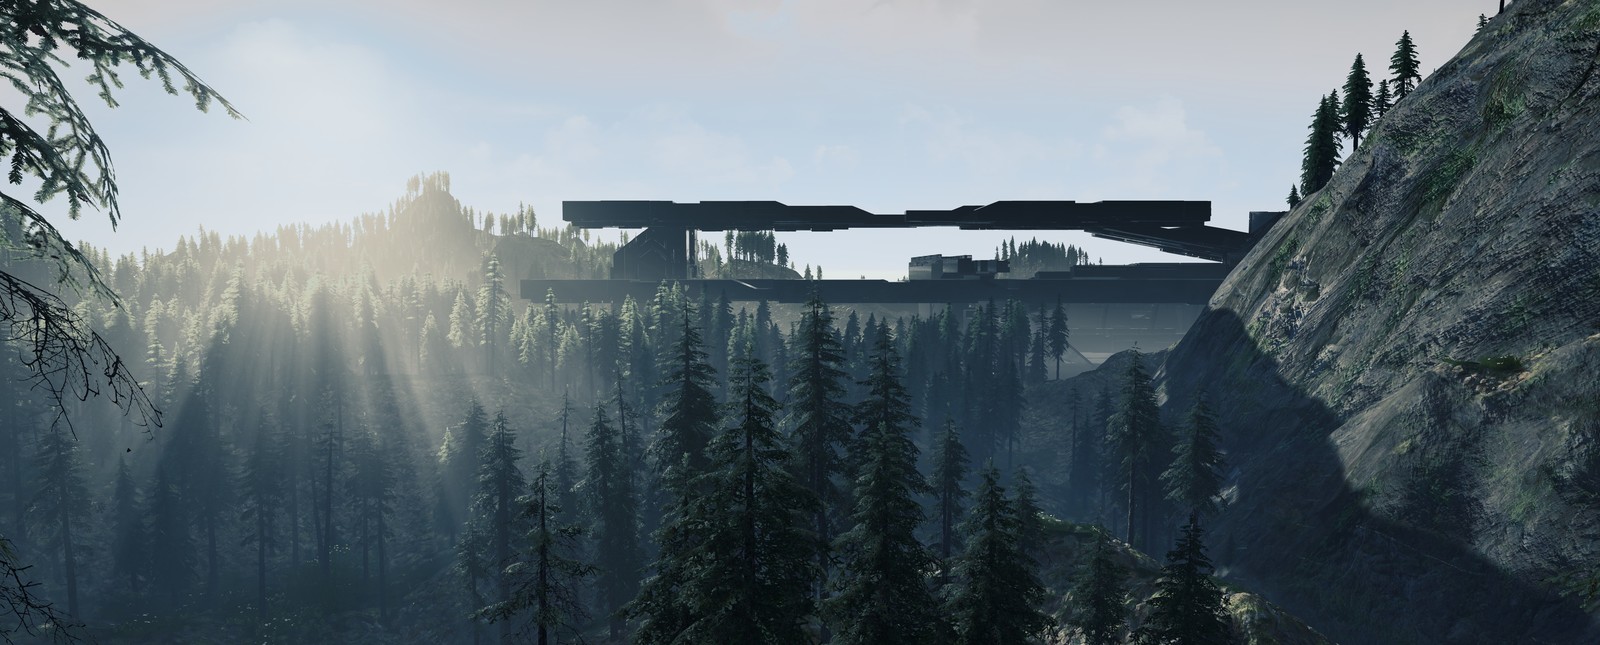 Unreal editor foliage and landscape around the tunnel update